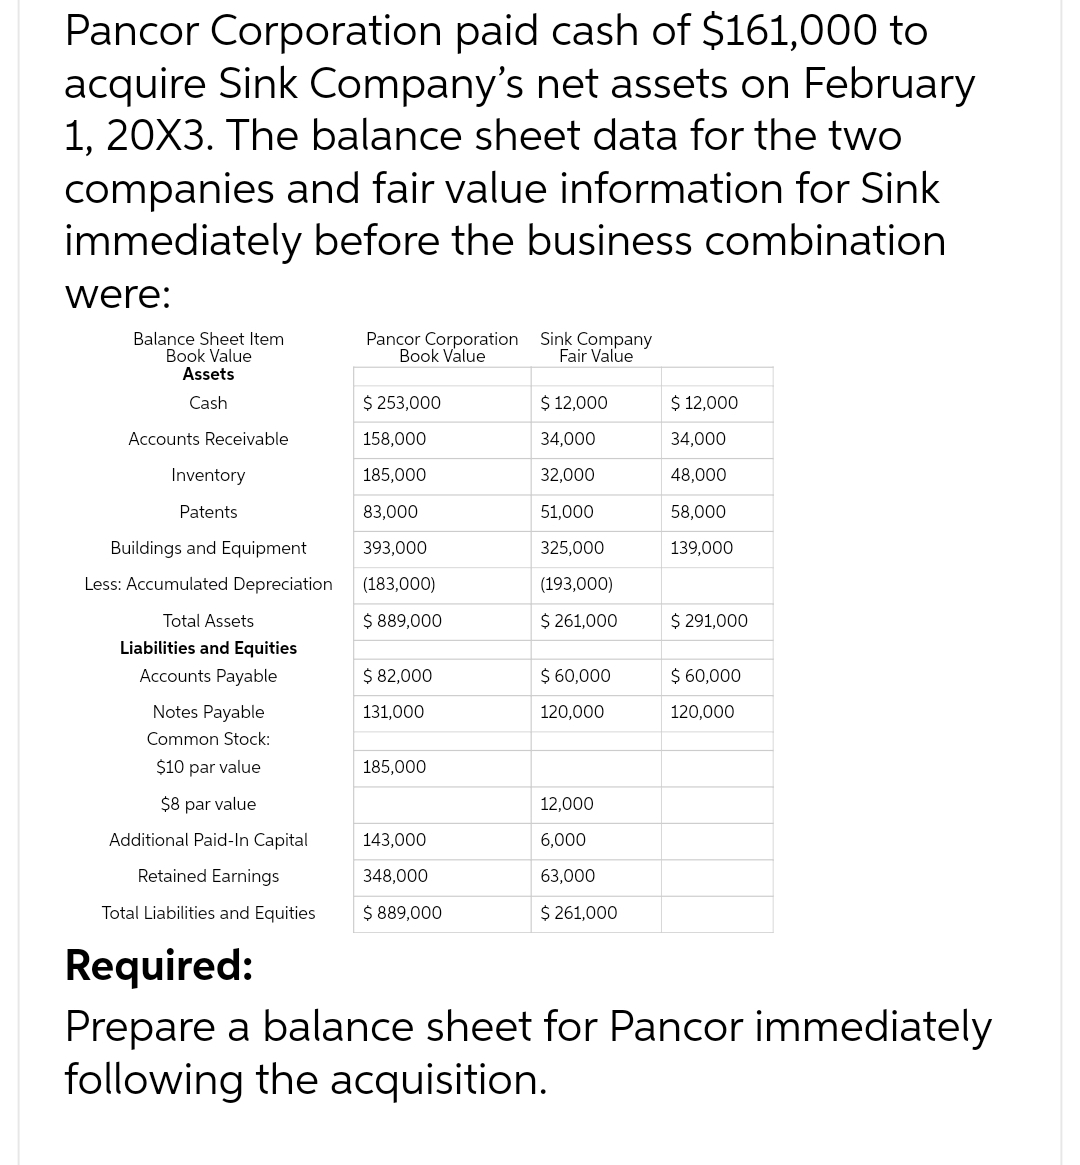 Pancor Corporation paid cash of $161,000 to
acquire Sink Company's net assets on February
1, 20X3. The balance sheet data for the two
companies and fair value information for Sink
immediately before the business combination
were:
Balance Sheet Item
Book Value
Assets
Cash
Accounts Receivable
Inventory
Patents
Buildings and Equipment
Less: Accumulated Depreciation
Total Assets
Liabilities and Equities
Accounts Payable
Notes Payable
Common Stock:
$10 par value
$8 par value
Additional Paid-In Capital
Retained Earnings
Total Liabilities and Equities
Pancor Corporation Sink Company
Book Value
Fair Value
$ 253,000
158,000
185,000
83,000
393,000
(183,000)
$ 889,000
$ 82,000
131,000
185,000
143,000
348,000
$ 889,000
$ 12,000
34,000
32,000
51,000
325,000
(193,000)
$ 261,000
$ 60,000
120,000
12,000
6,000
63,000
$ 261,000
$ 12,000
34,000
48,000
58,000
139,000
$ 291,000
$ 60,000
120,000
Required:
Prepare a balance sheet for Pancor immediately
following the acquisition.